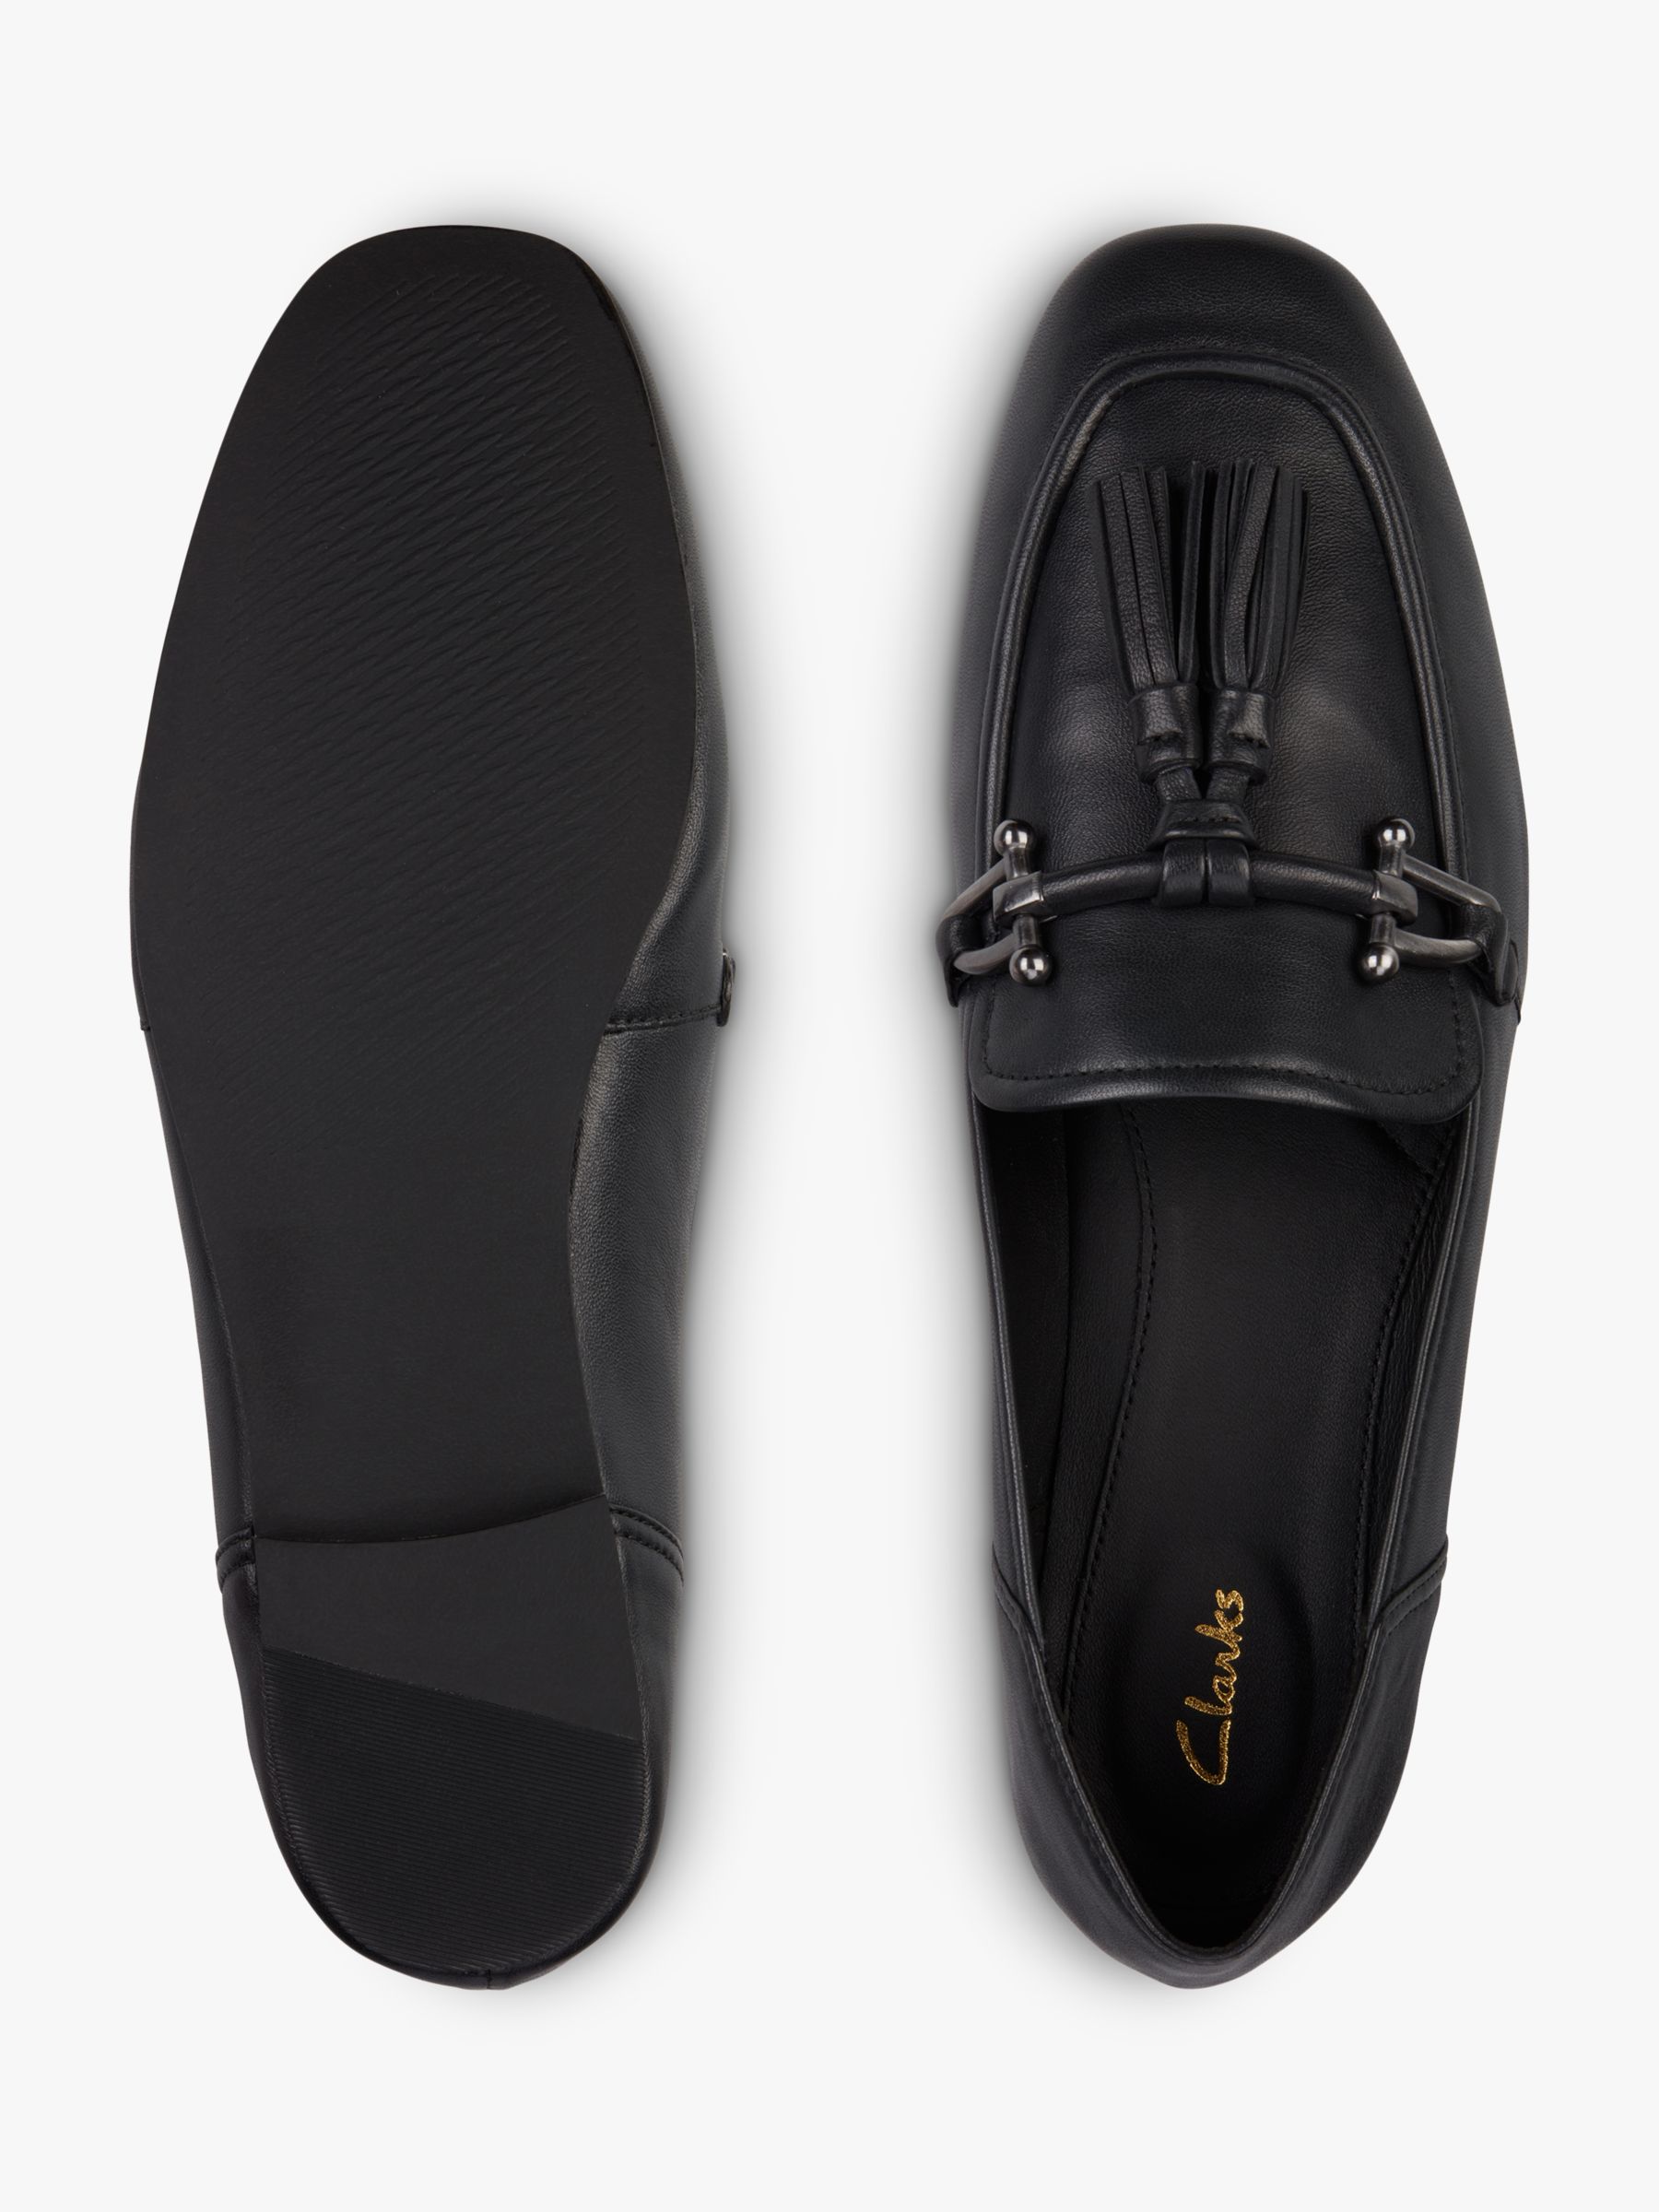 Clarks Pure 2 Leather Tassel Loafers, Black at John Lewis & Partners